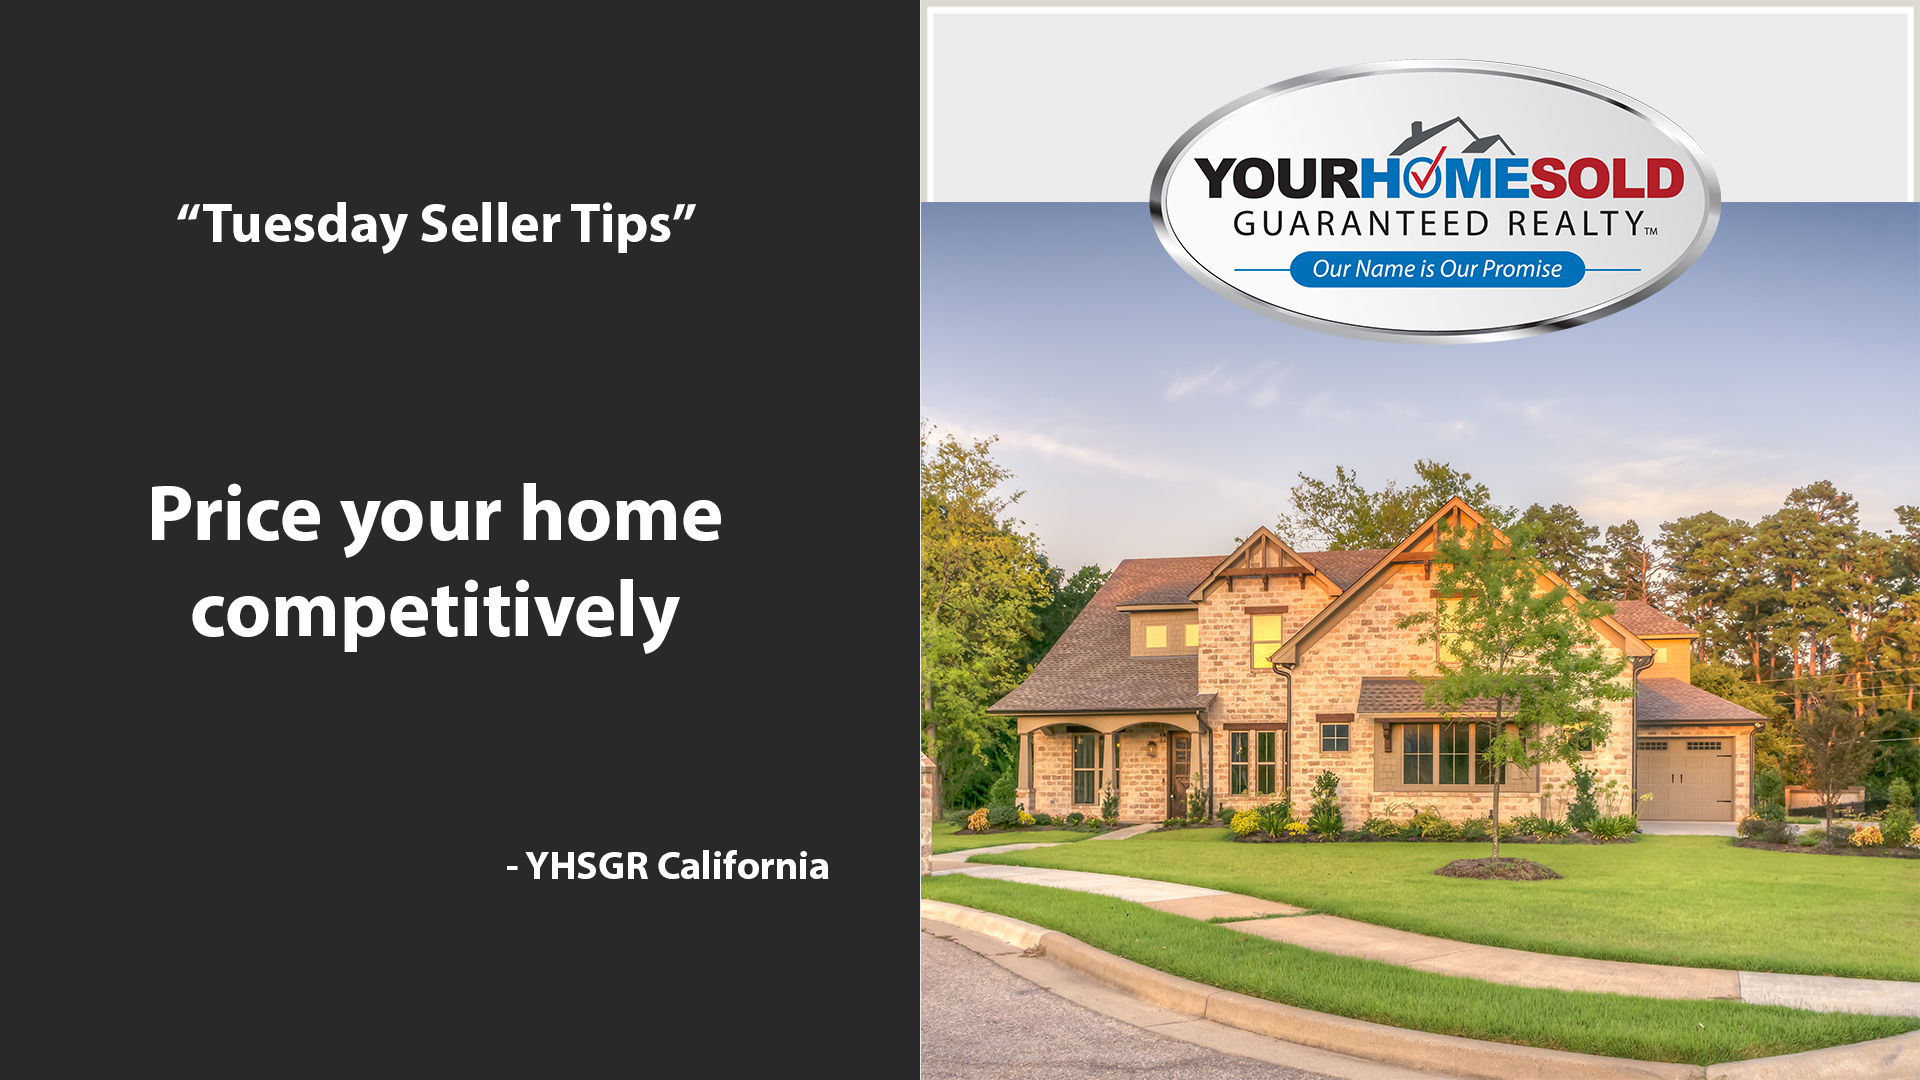 Tips for selling your home in a seller's market